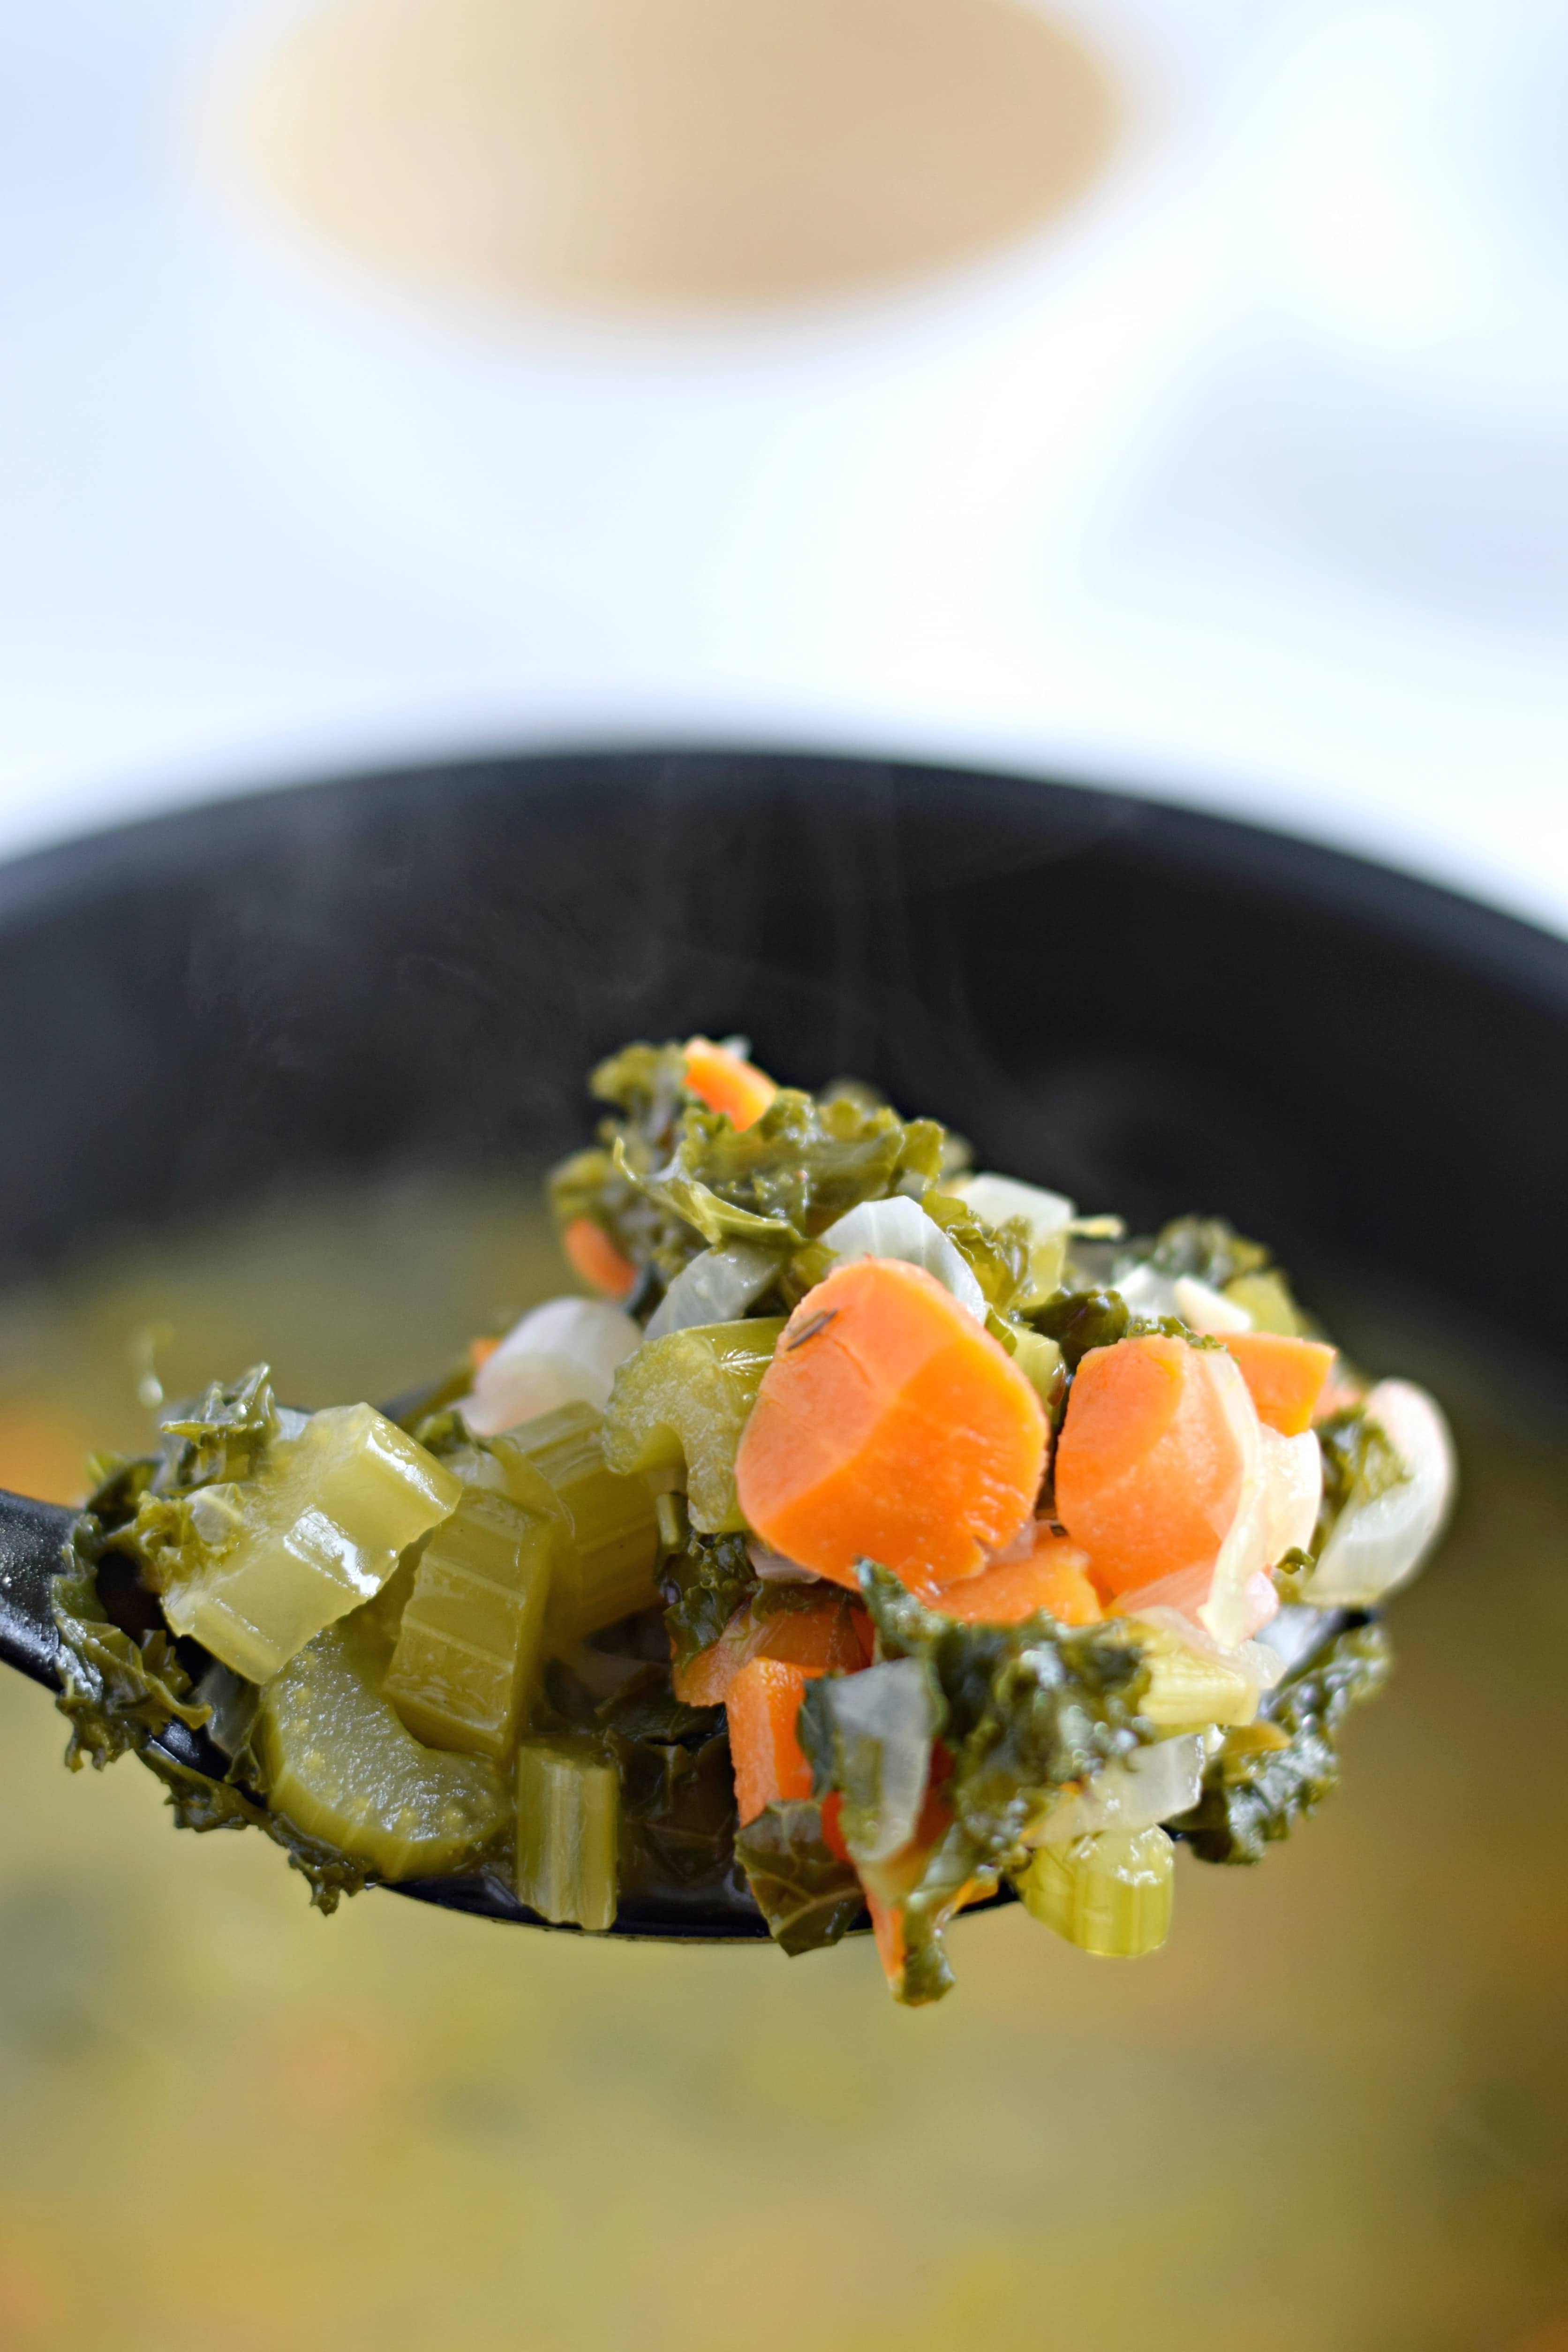 This Winter Kale Vegetable soup is loaded with vegetables like kale, carrots and celery and packed with super savory herbs like rosemary, thyme and garlic. Perfect for the cold winter days. (gluten free, paleo, vegetarian, vegan) - isabeleats.com